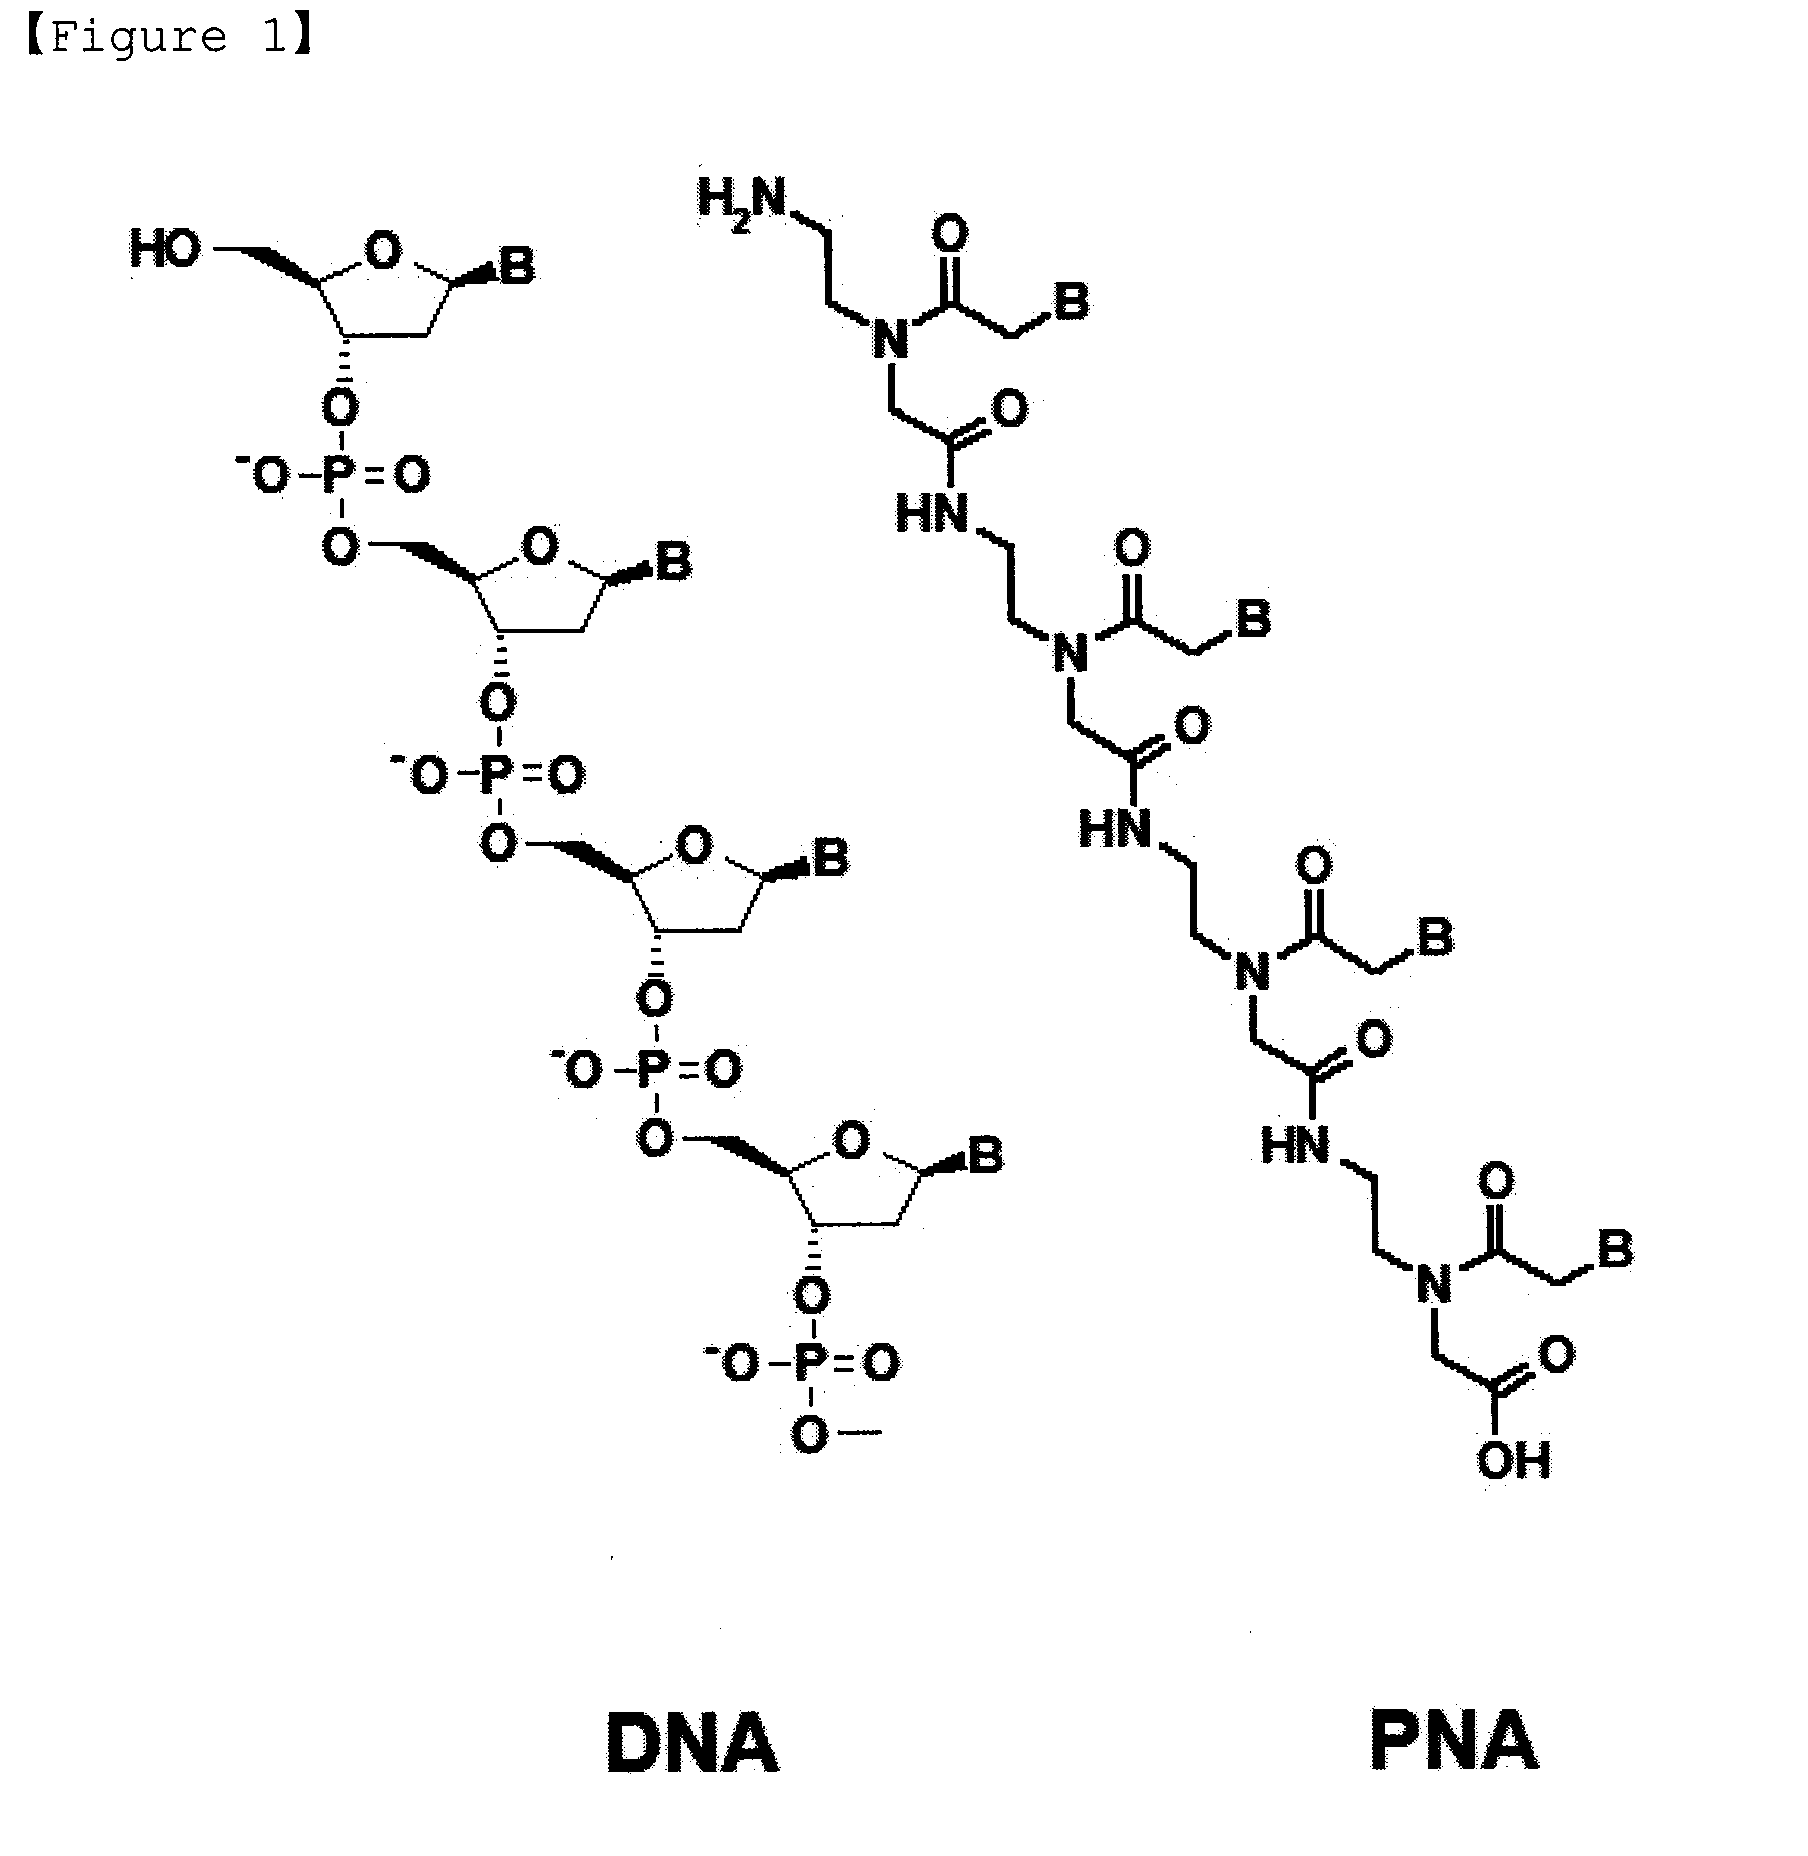 Method for Selective Labeling and Detection of Target Nucleic Acids Using Immobilized Peptide Nucleic Acid Probes